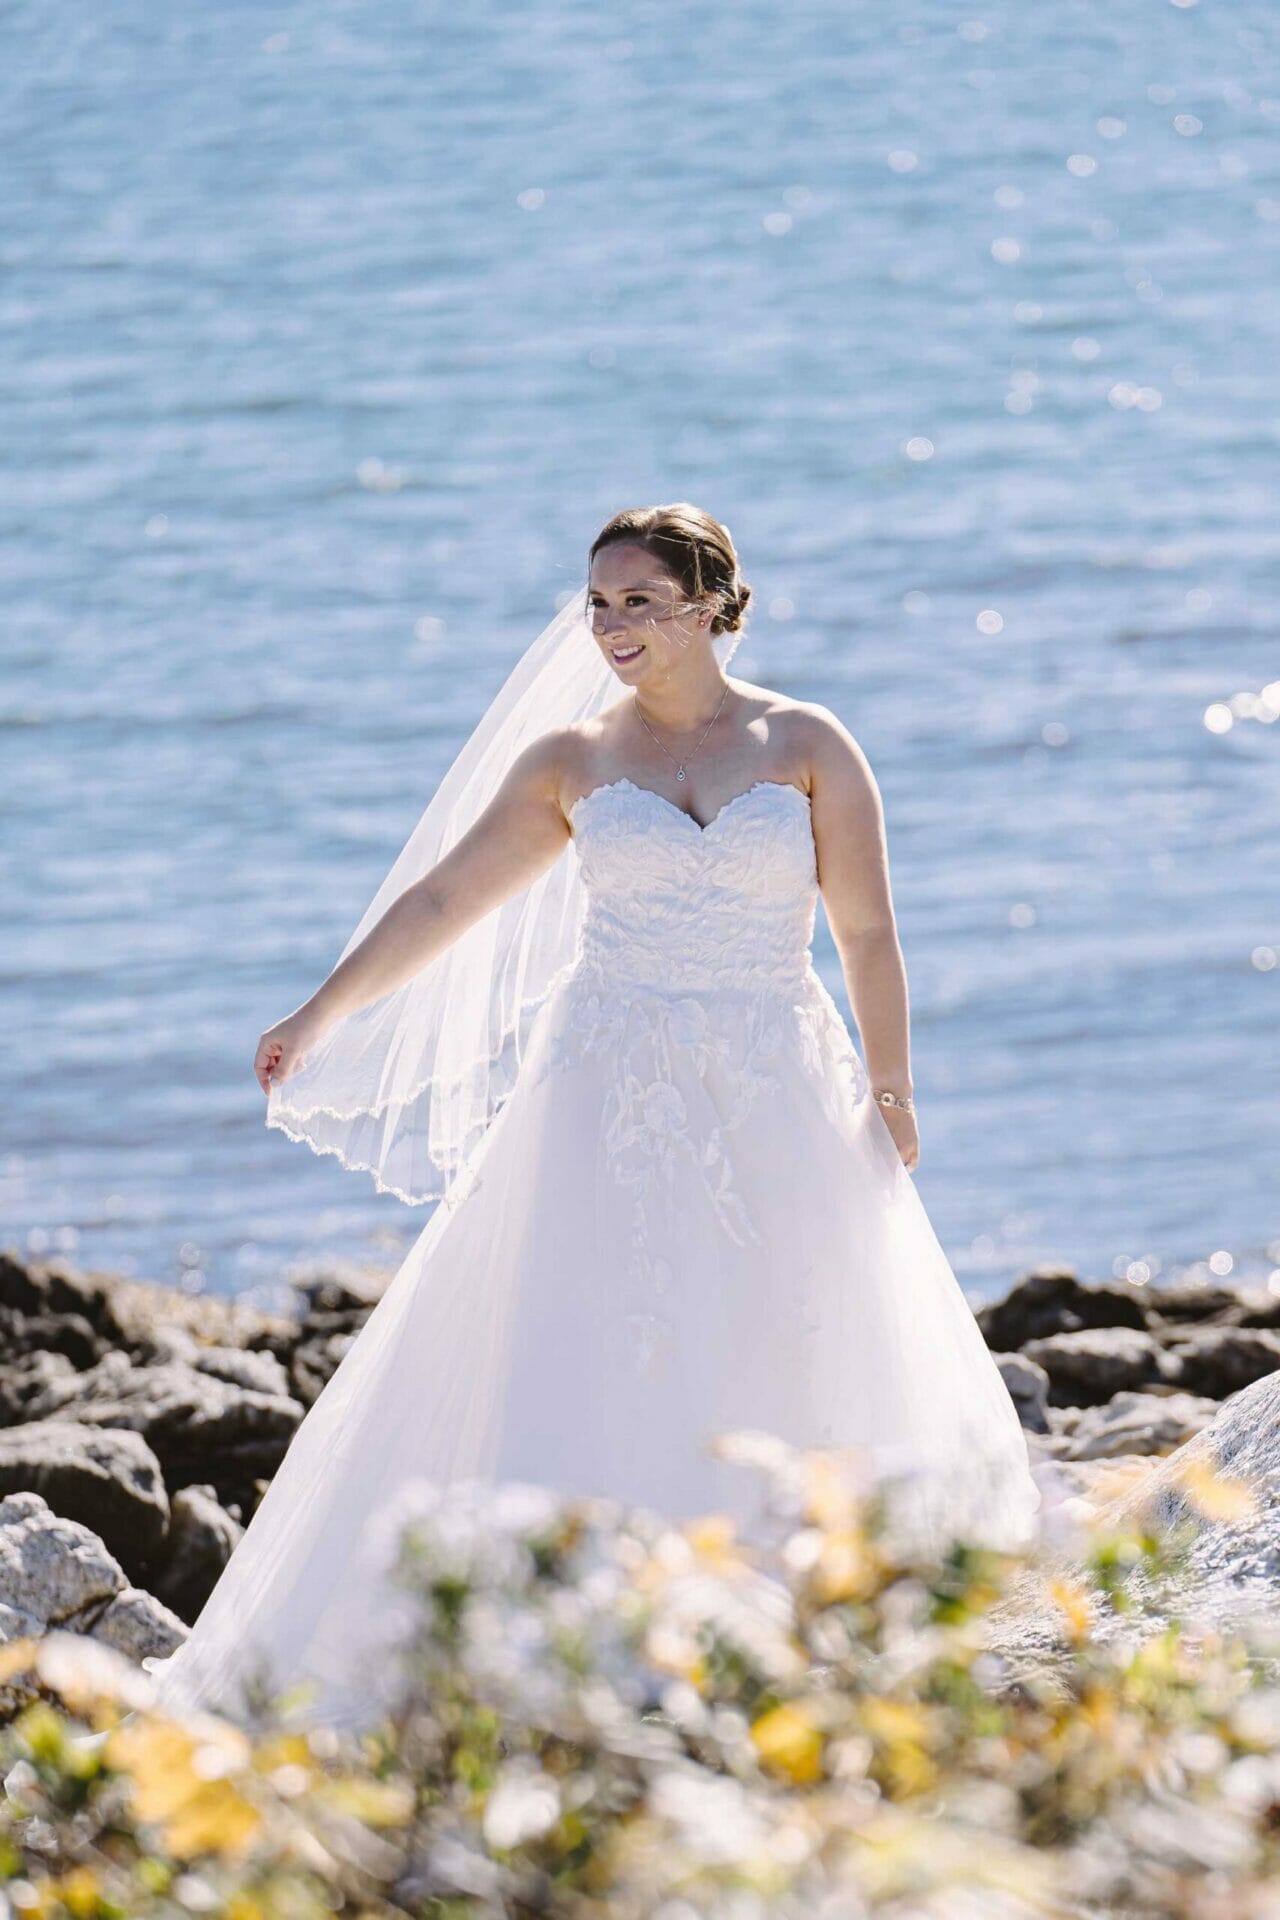 A bride in a wedding dress standing on rocks near the water, showcasing the elegance of bridal couture.